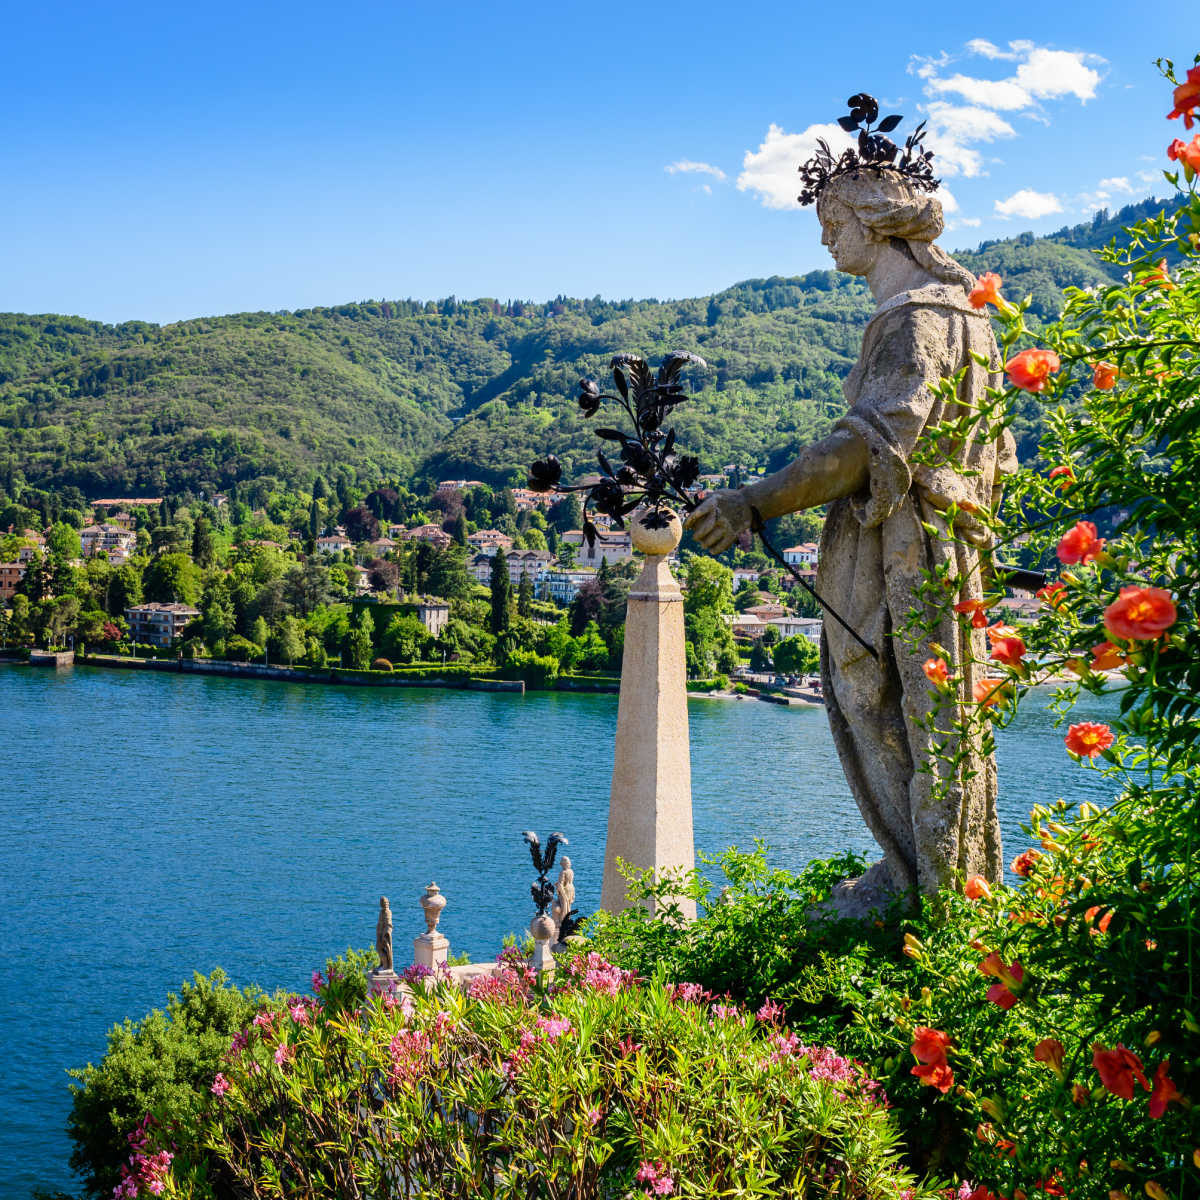 Isola Bella is located in the middle of Lake Maggiore you can get with liners or private just 5 minutes off the town of Stresa. The island owes its fame to the Borromeo family who built a magnificent palace with a beautiful garden.